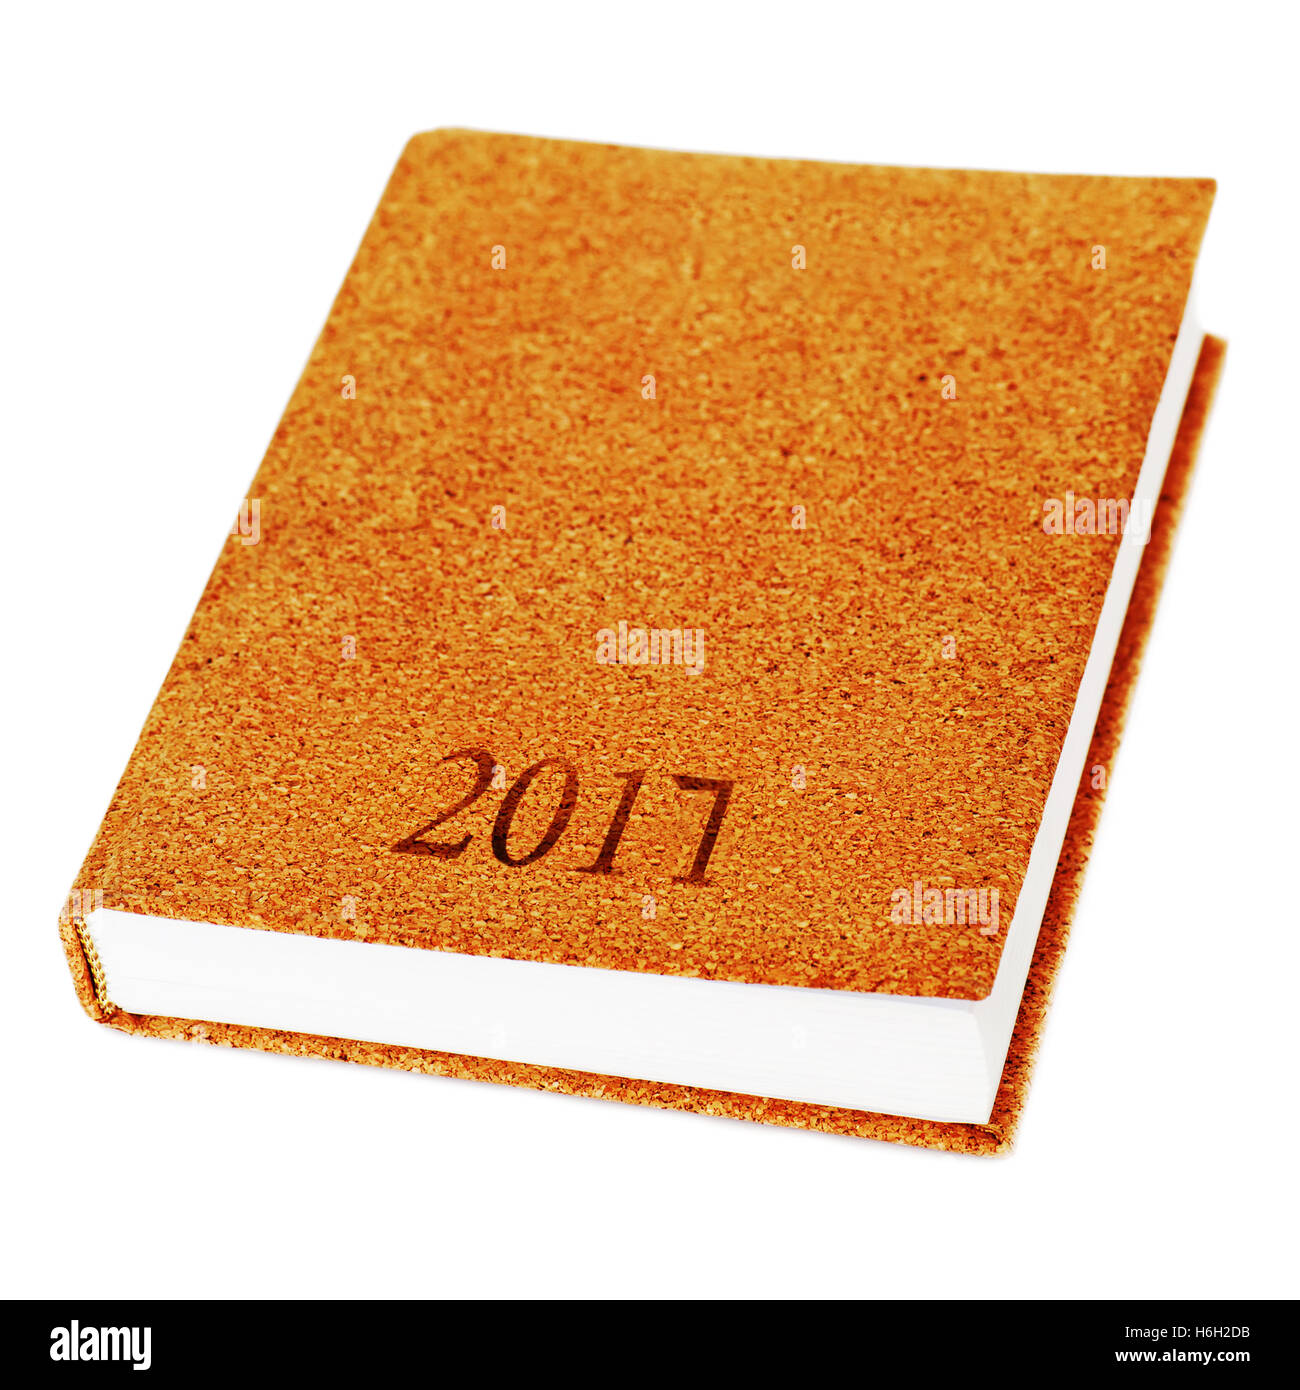 2017 year diary book isolate on white background. Stock Photo